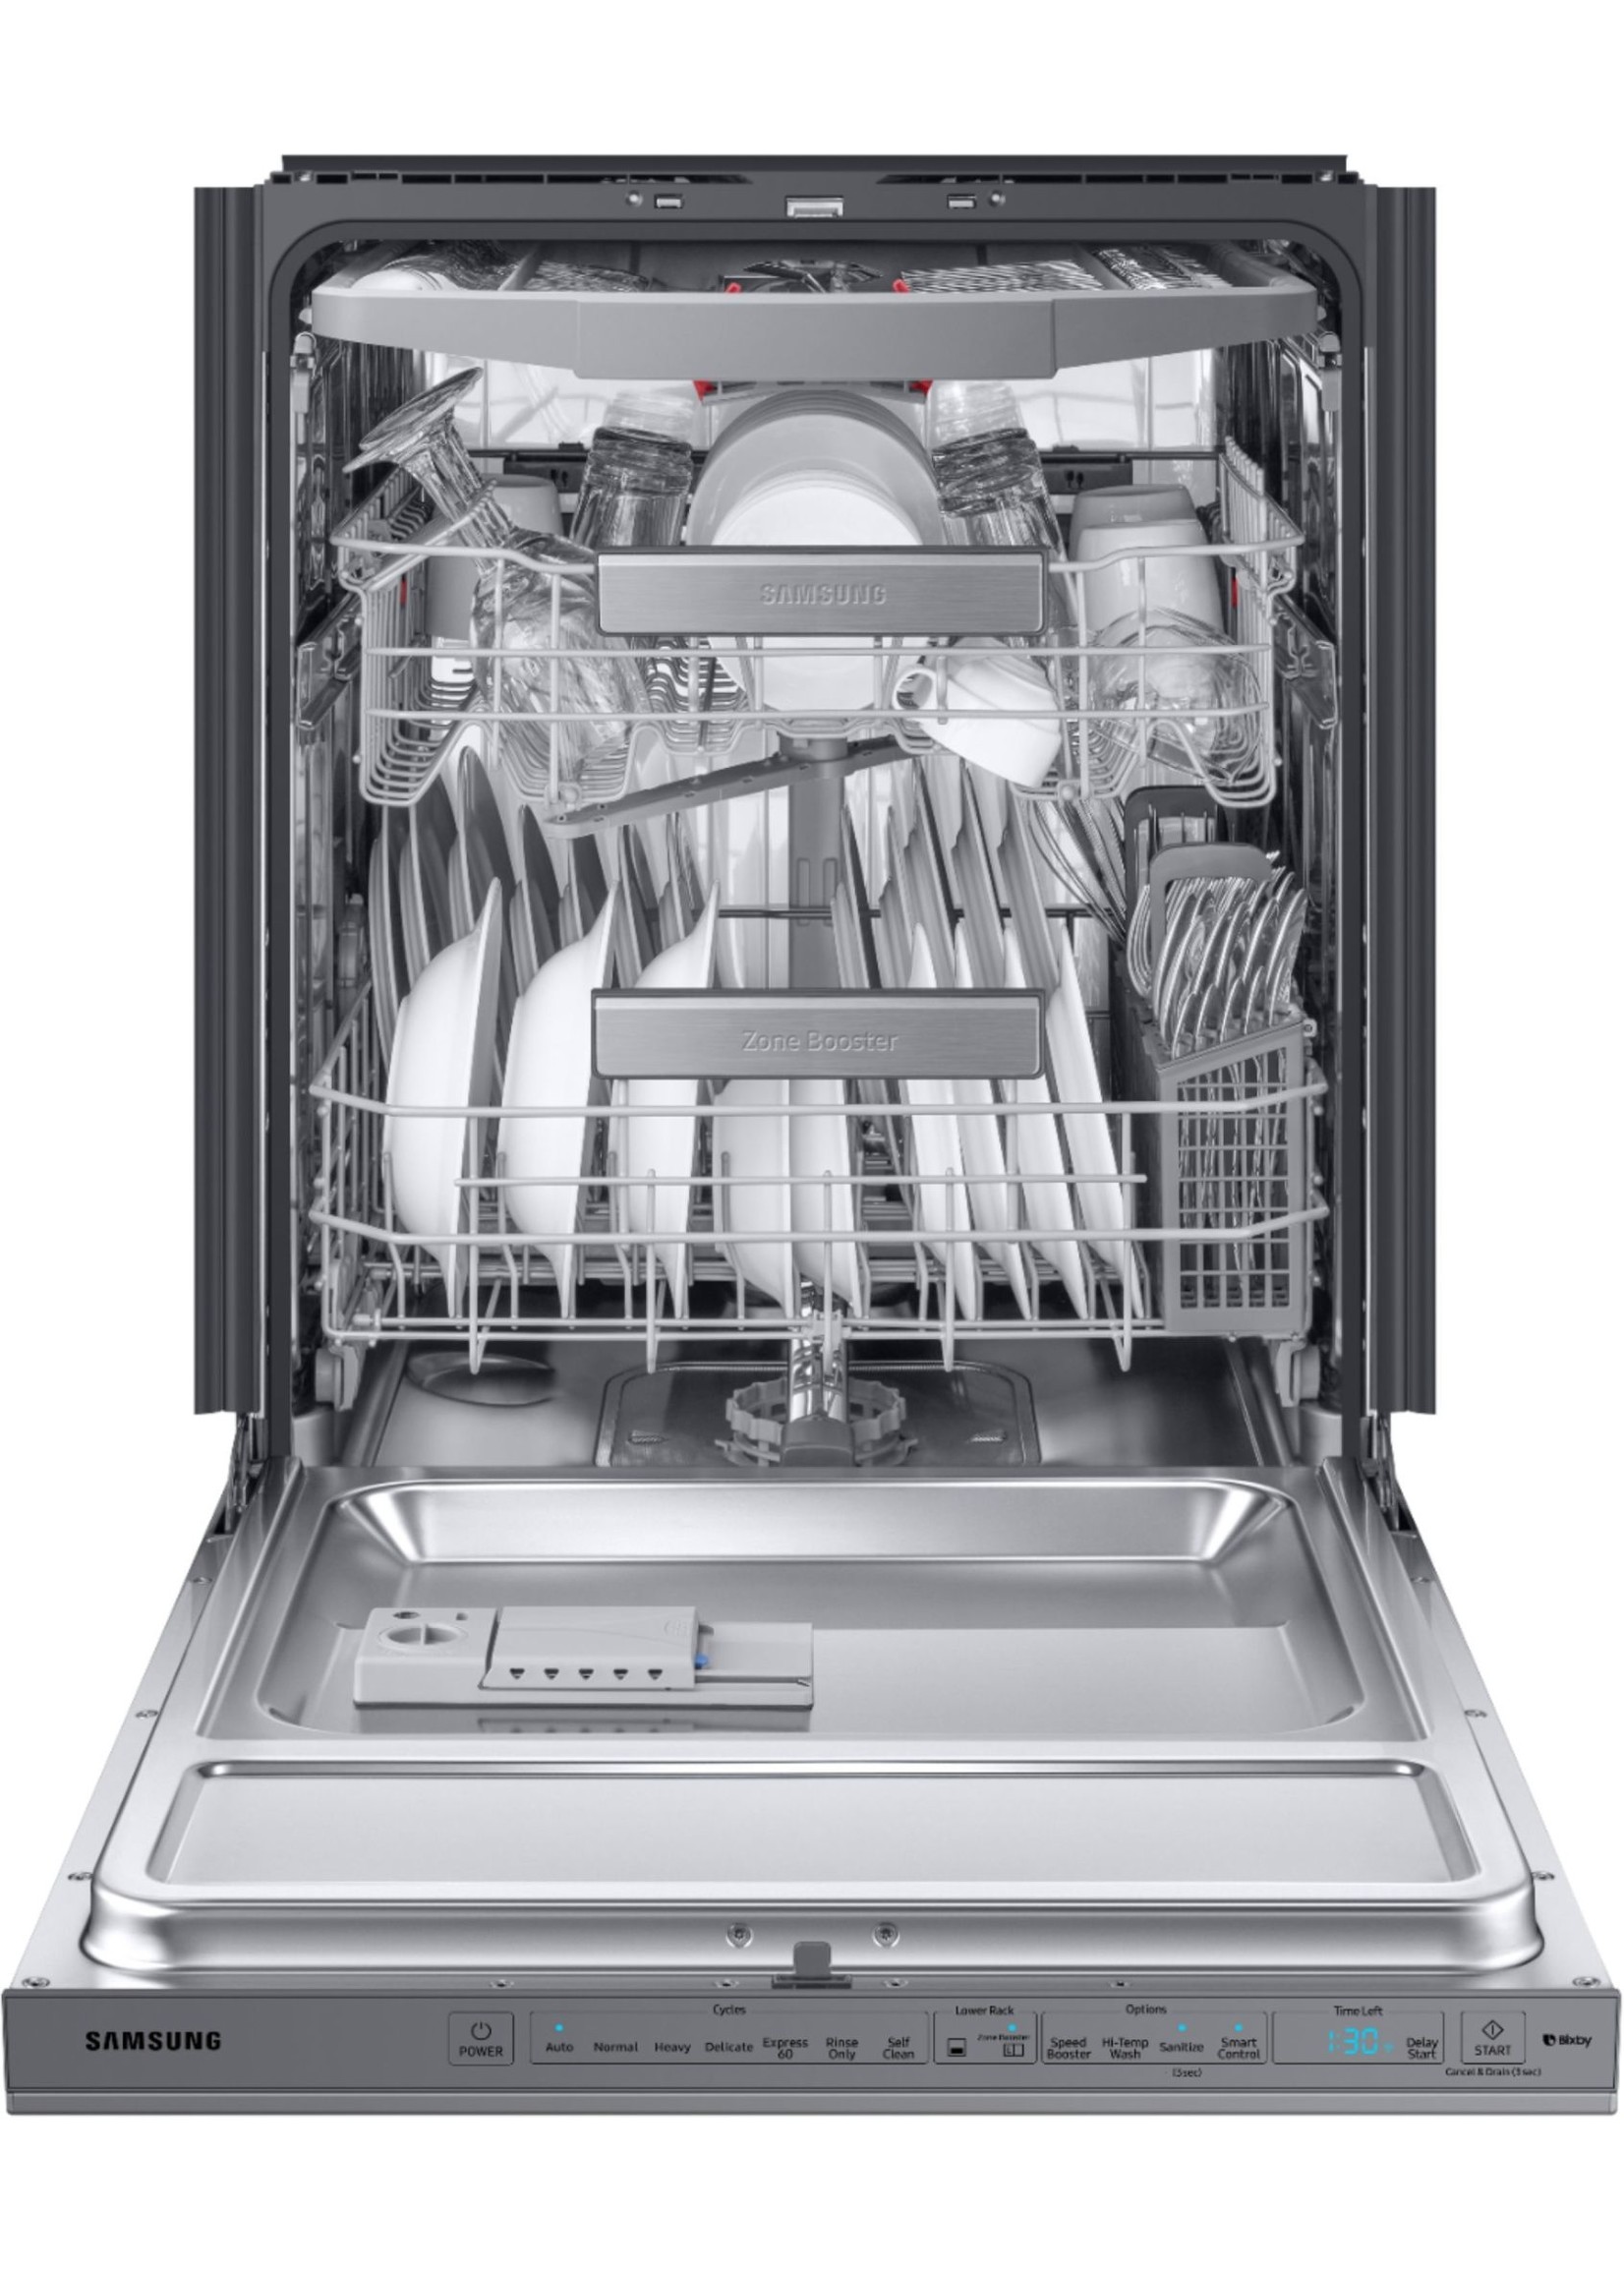 SAMSUNG 24 in. Top Control Tall Tub Dishwasher in Fingerprint Resistant Stainless Steel with AutoRelease, 3rd Rack, 39 dBA